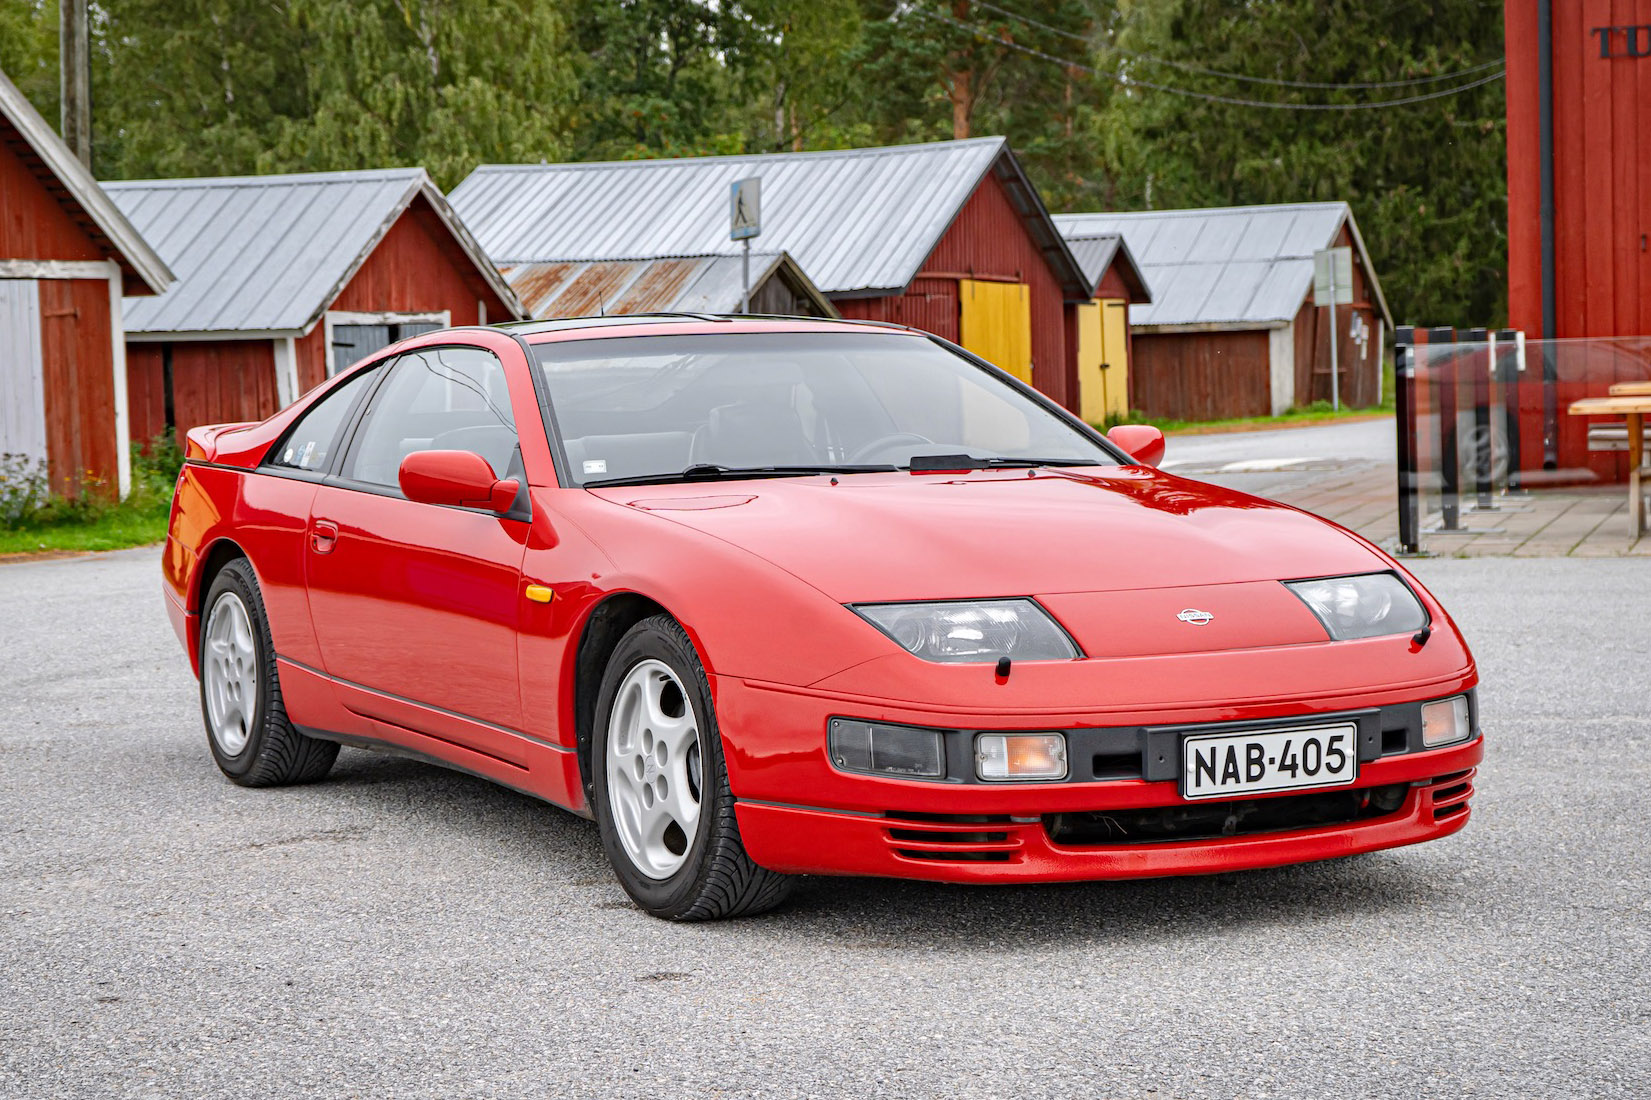 1990 NISSAN 300ZX TWIN TURBO for sale by auction in Nykarleby, Finland